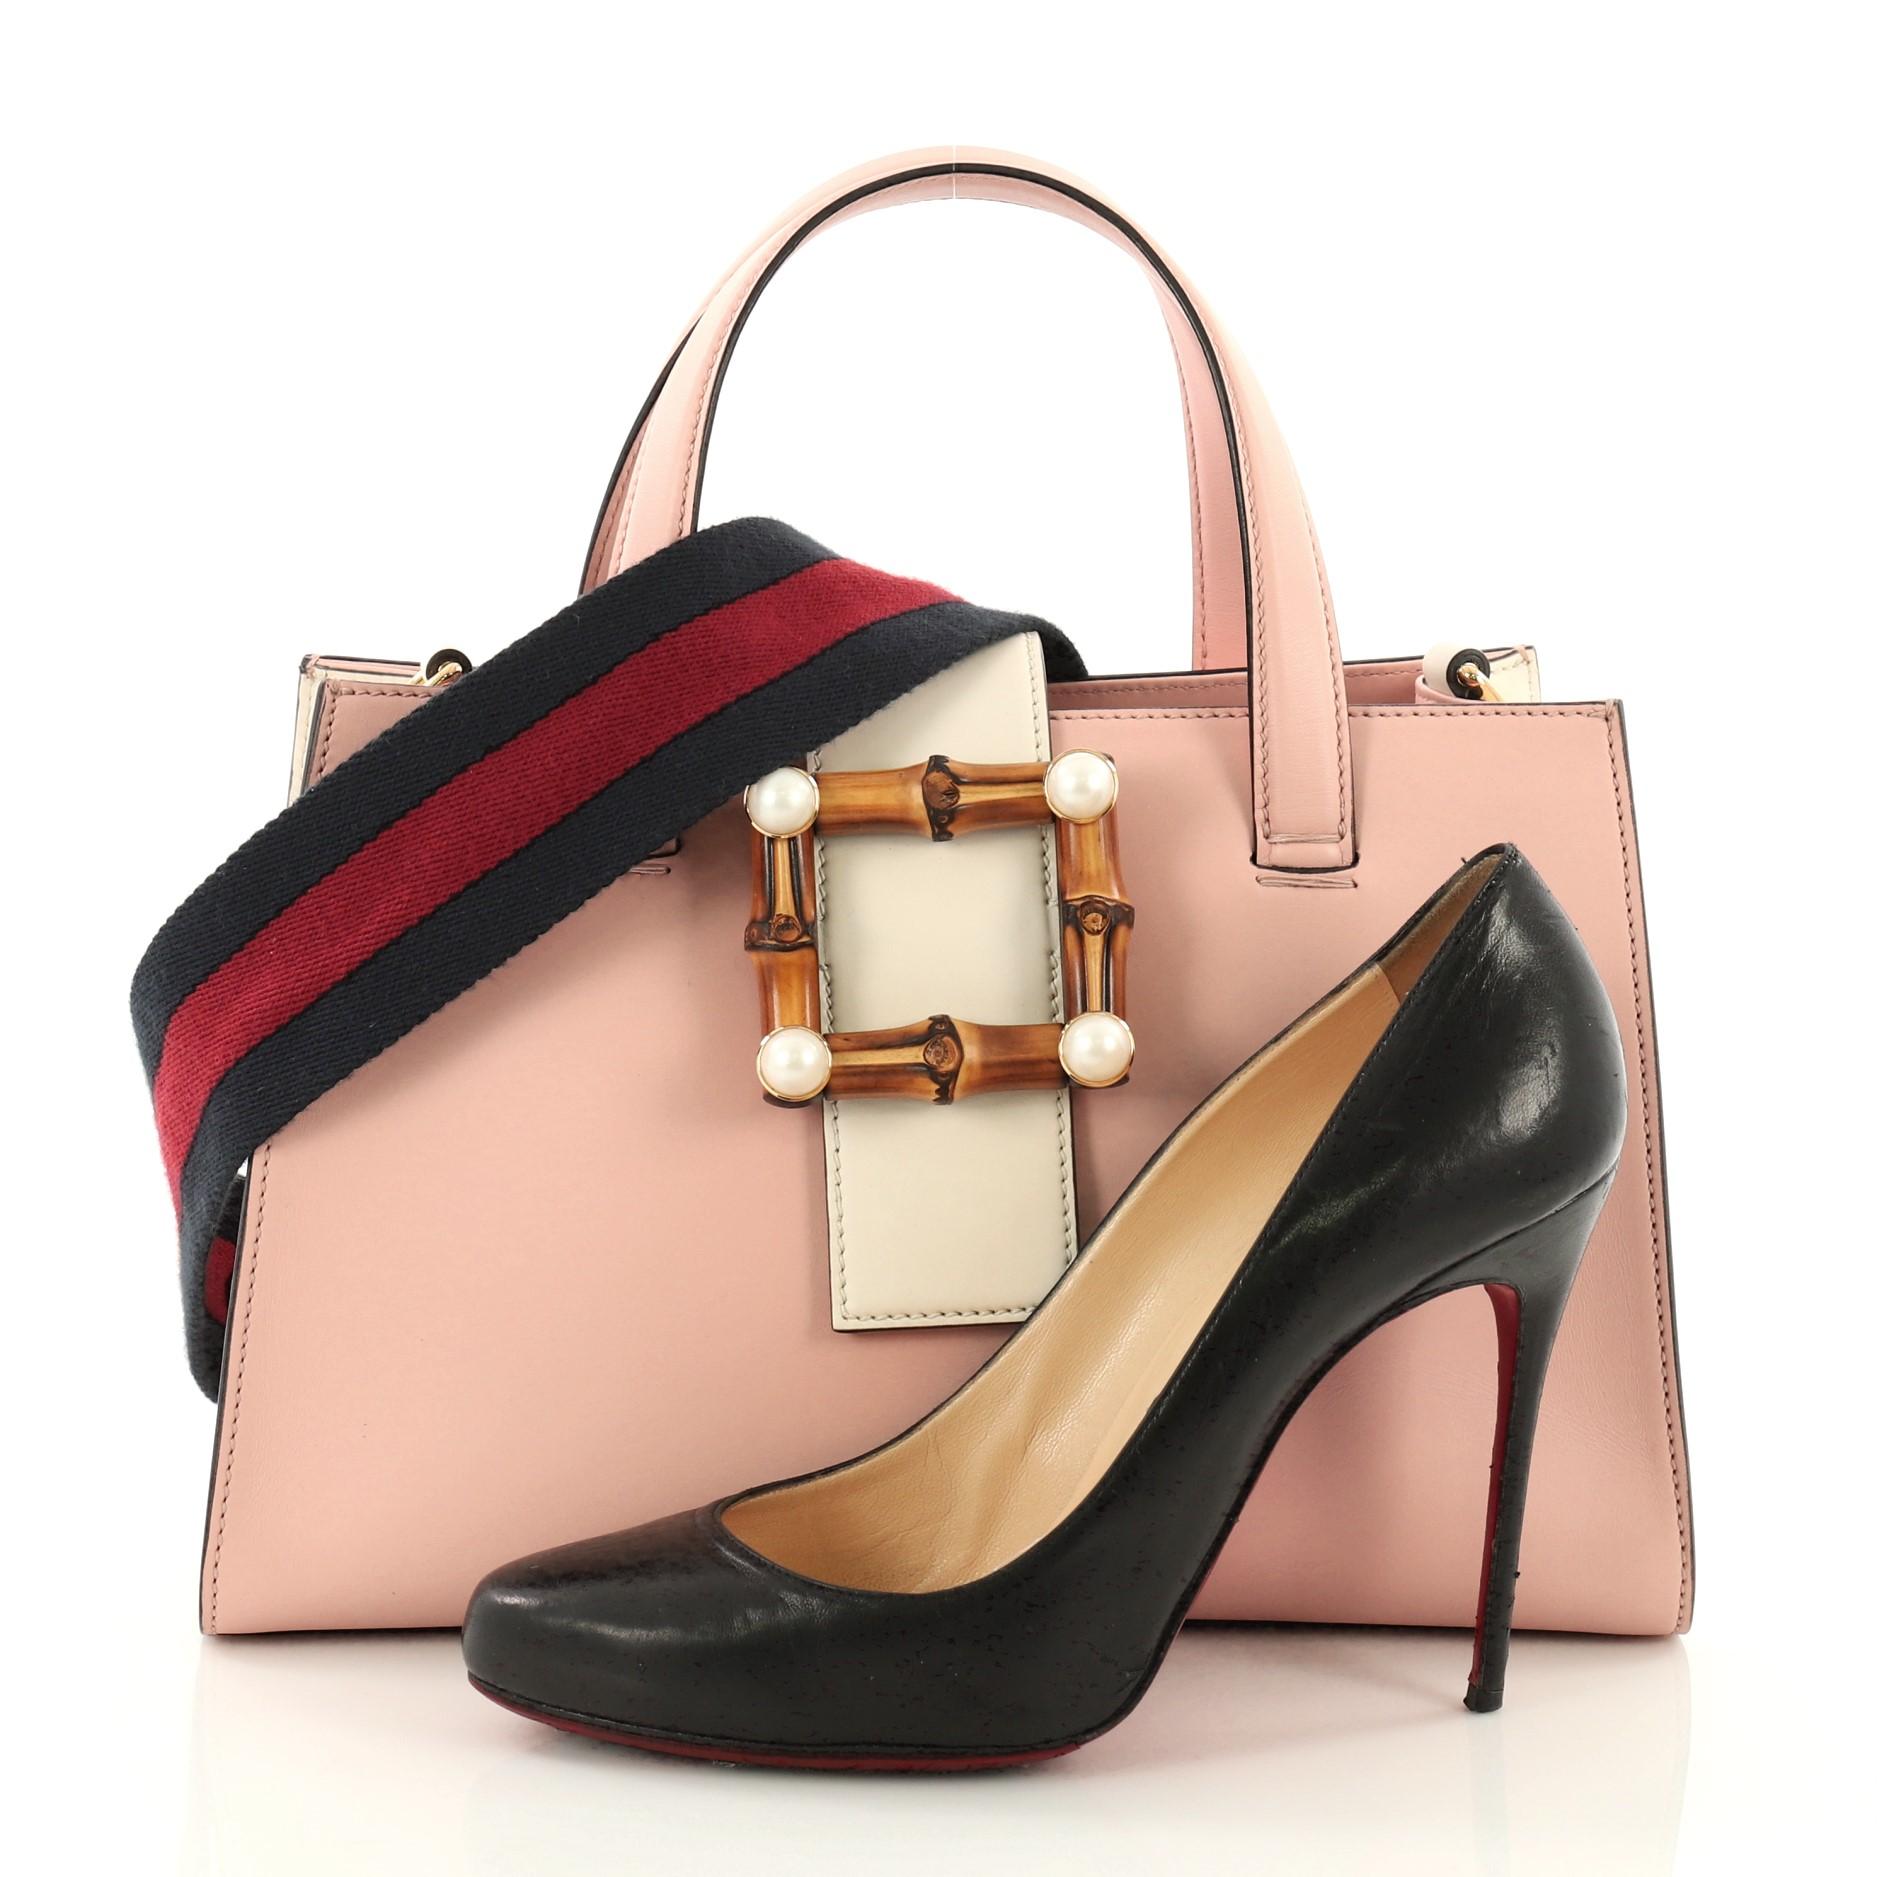 This Gucci Bamboo Buckle Tote Leather Small, crafted in pink leather, features dual leather handles, bamboo buckle closure and gold-tone hardware. Its bamboo buckle closure opens to a gray microfiber interior with zip and slip pockets. **Note: Shoe